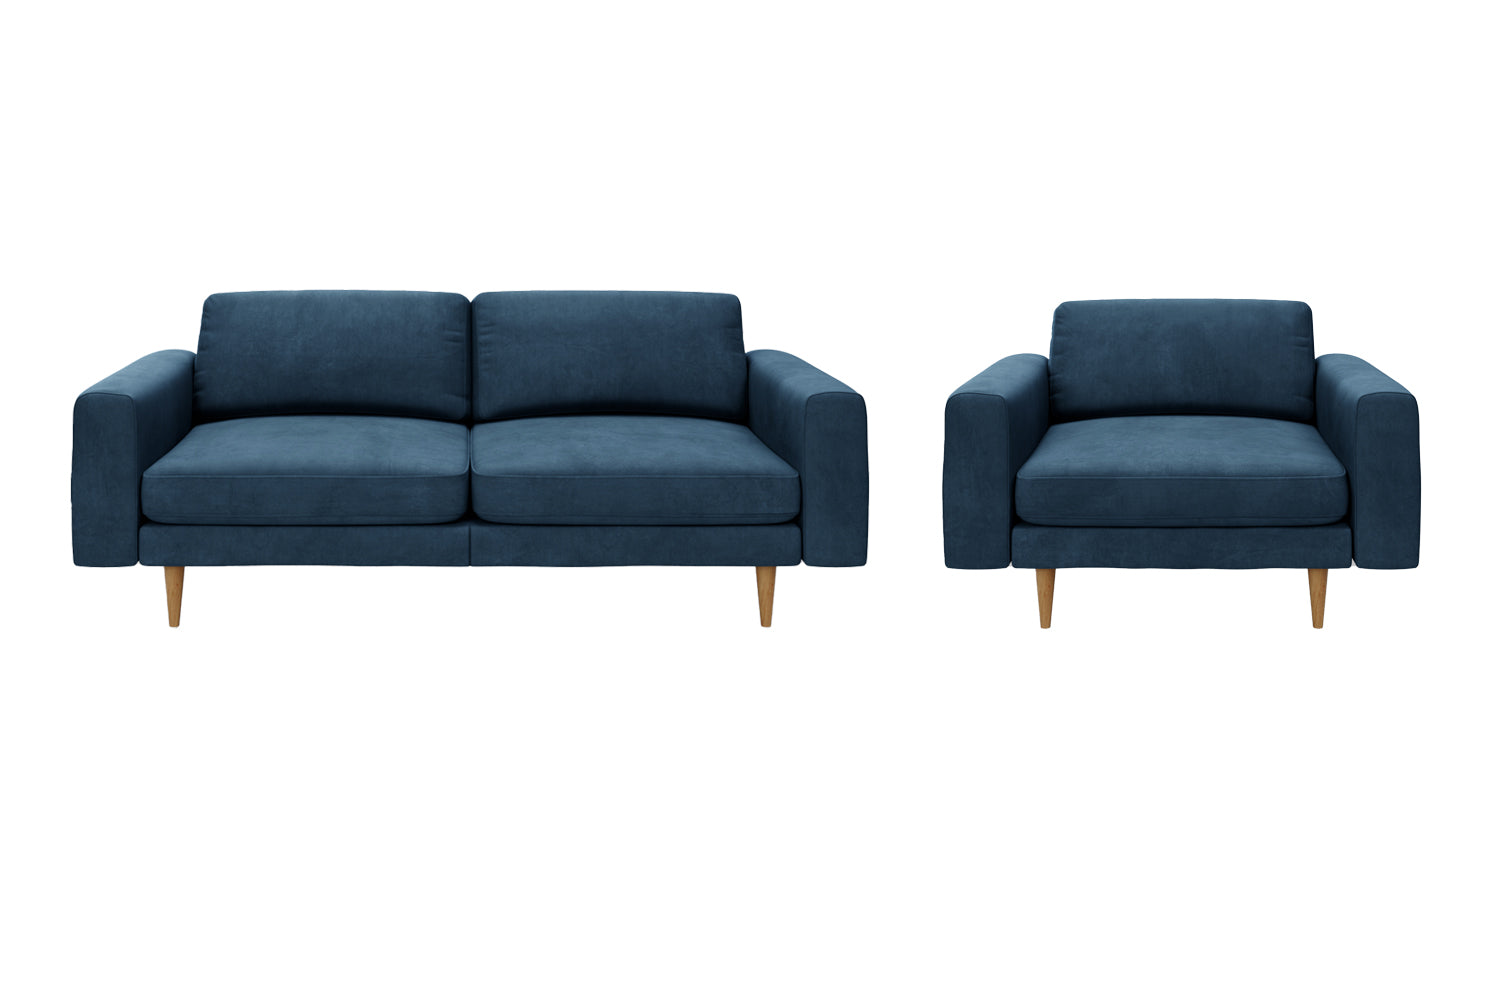 The Big Chill - 3 Seater Sofa and 1.5 Seater Snuggler Set - Blue Steel